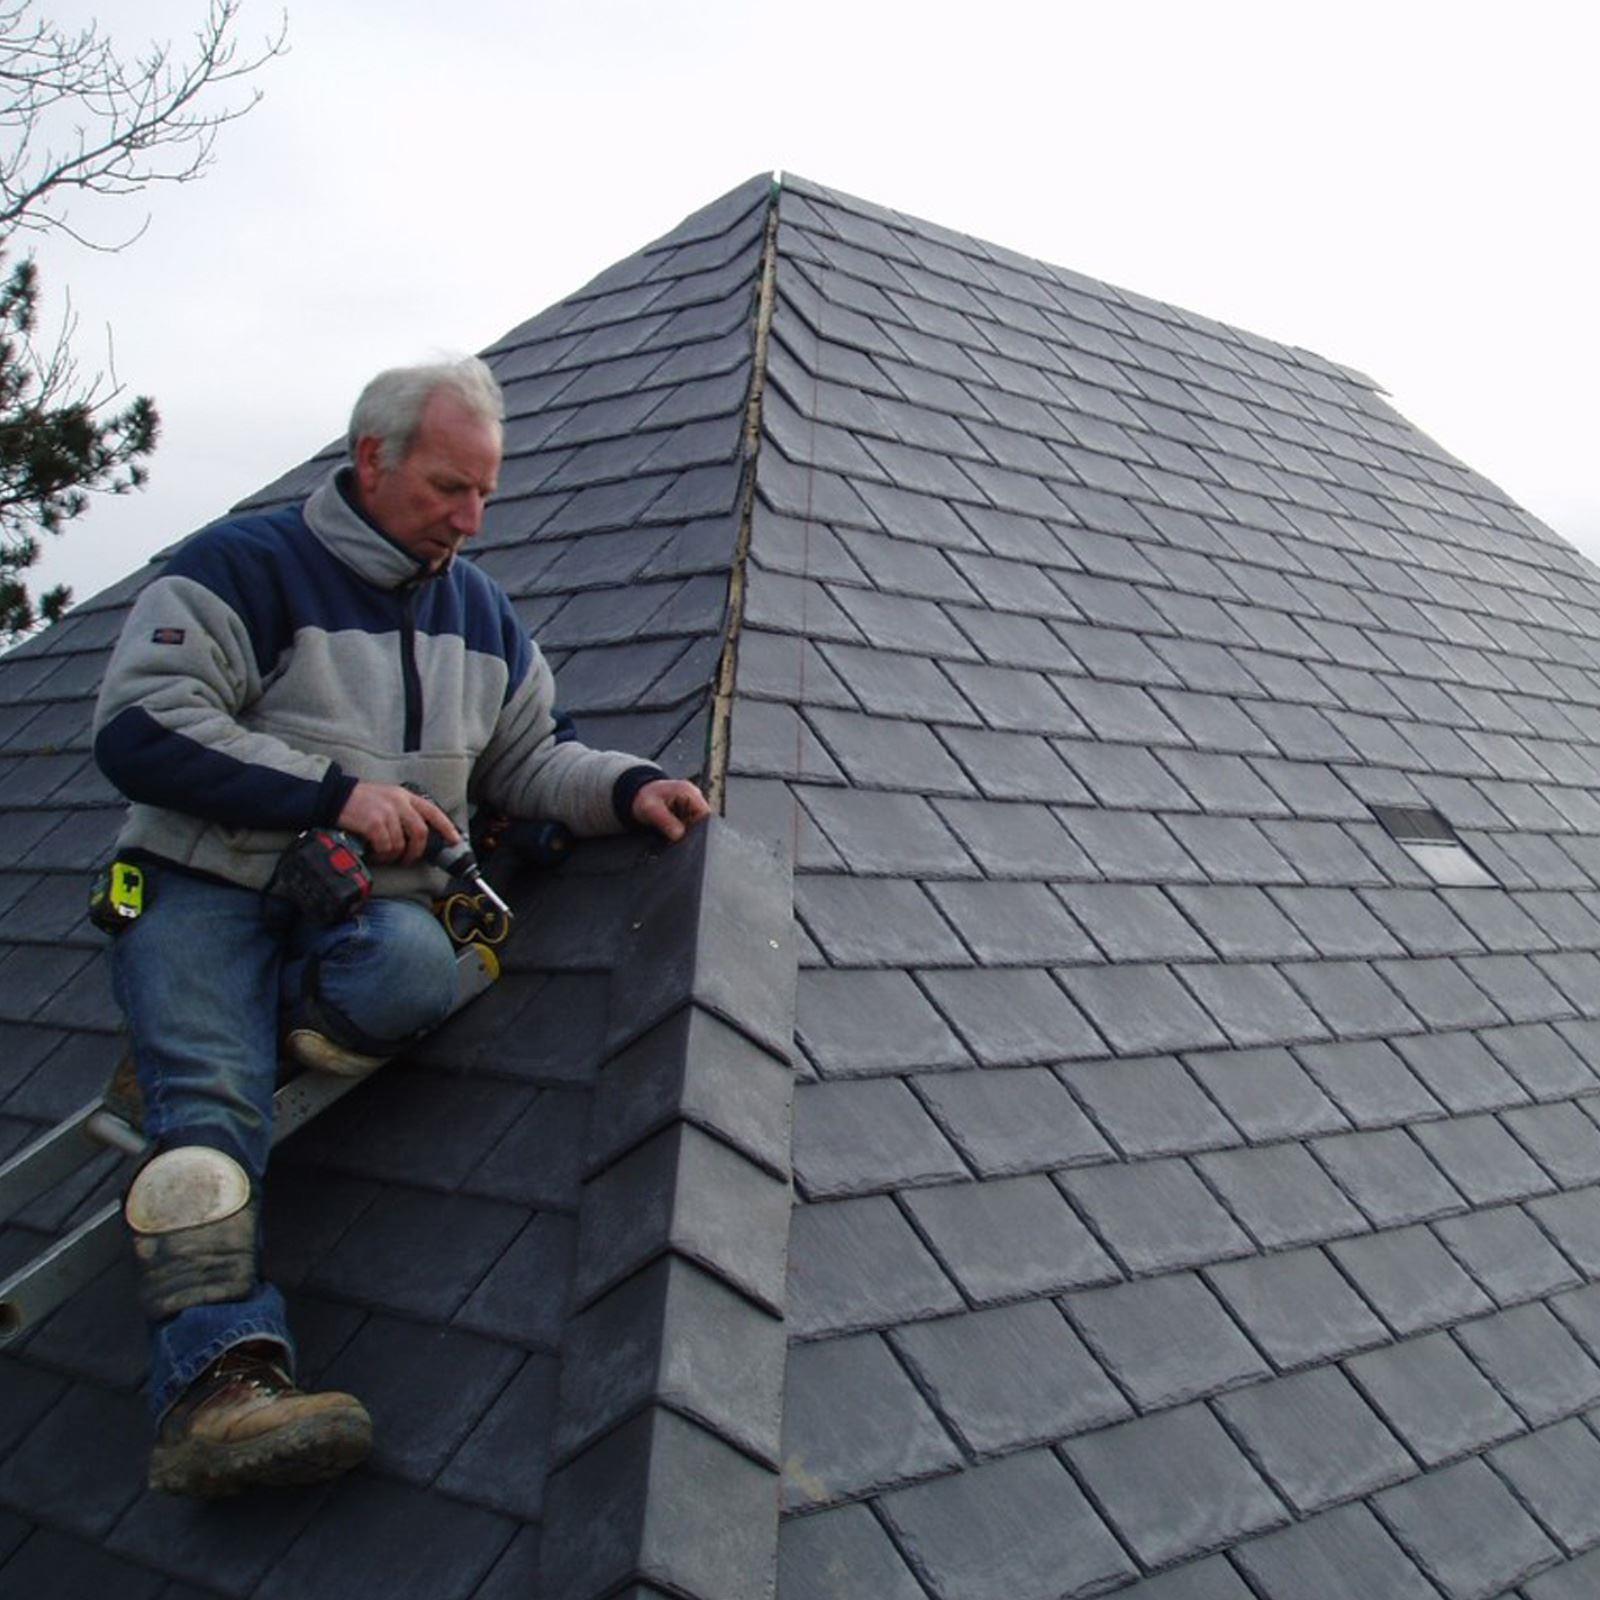 Tapco Slate Synthetic Roof Tile Plastic, Artificial Slate Roof Tiles Review